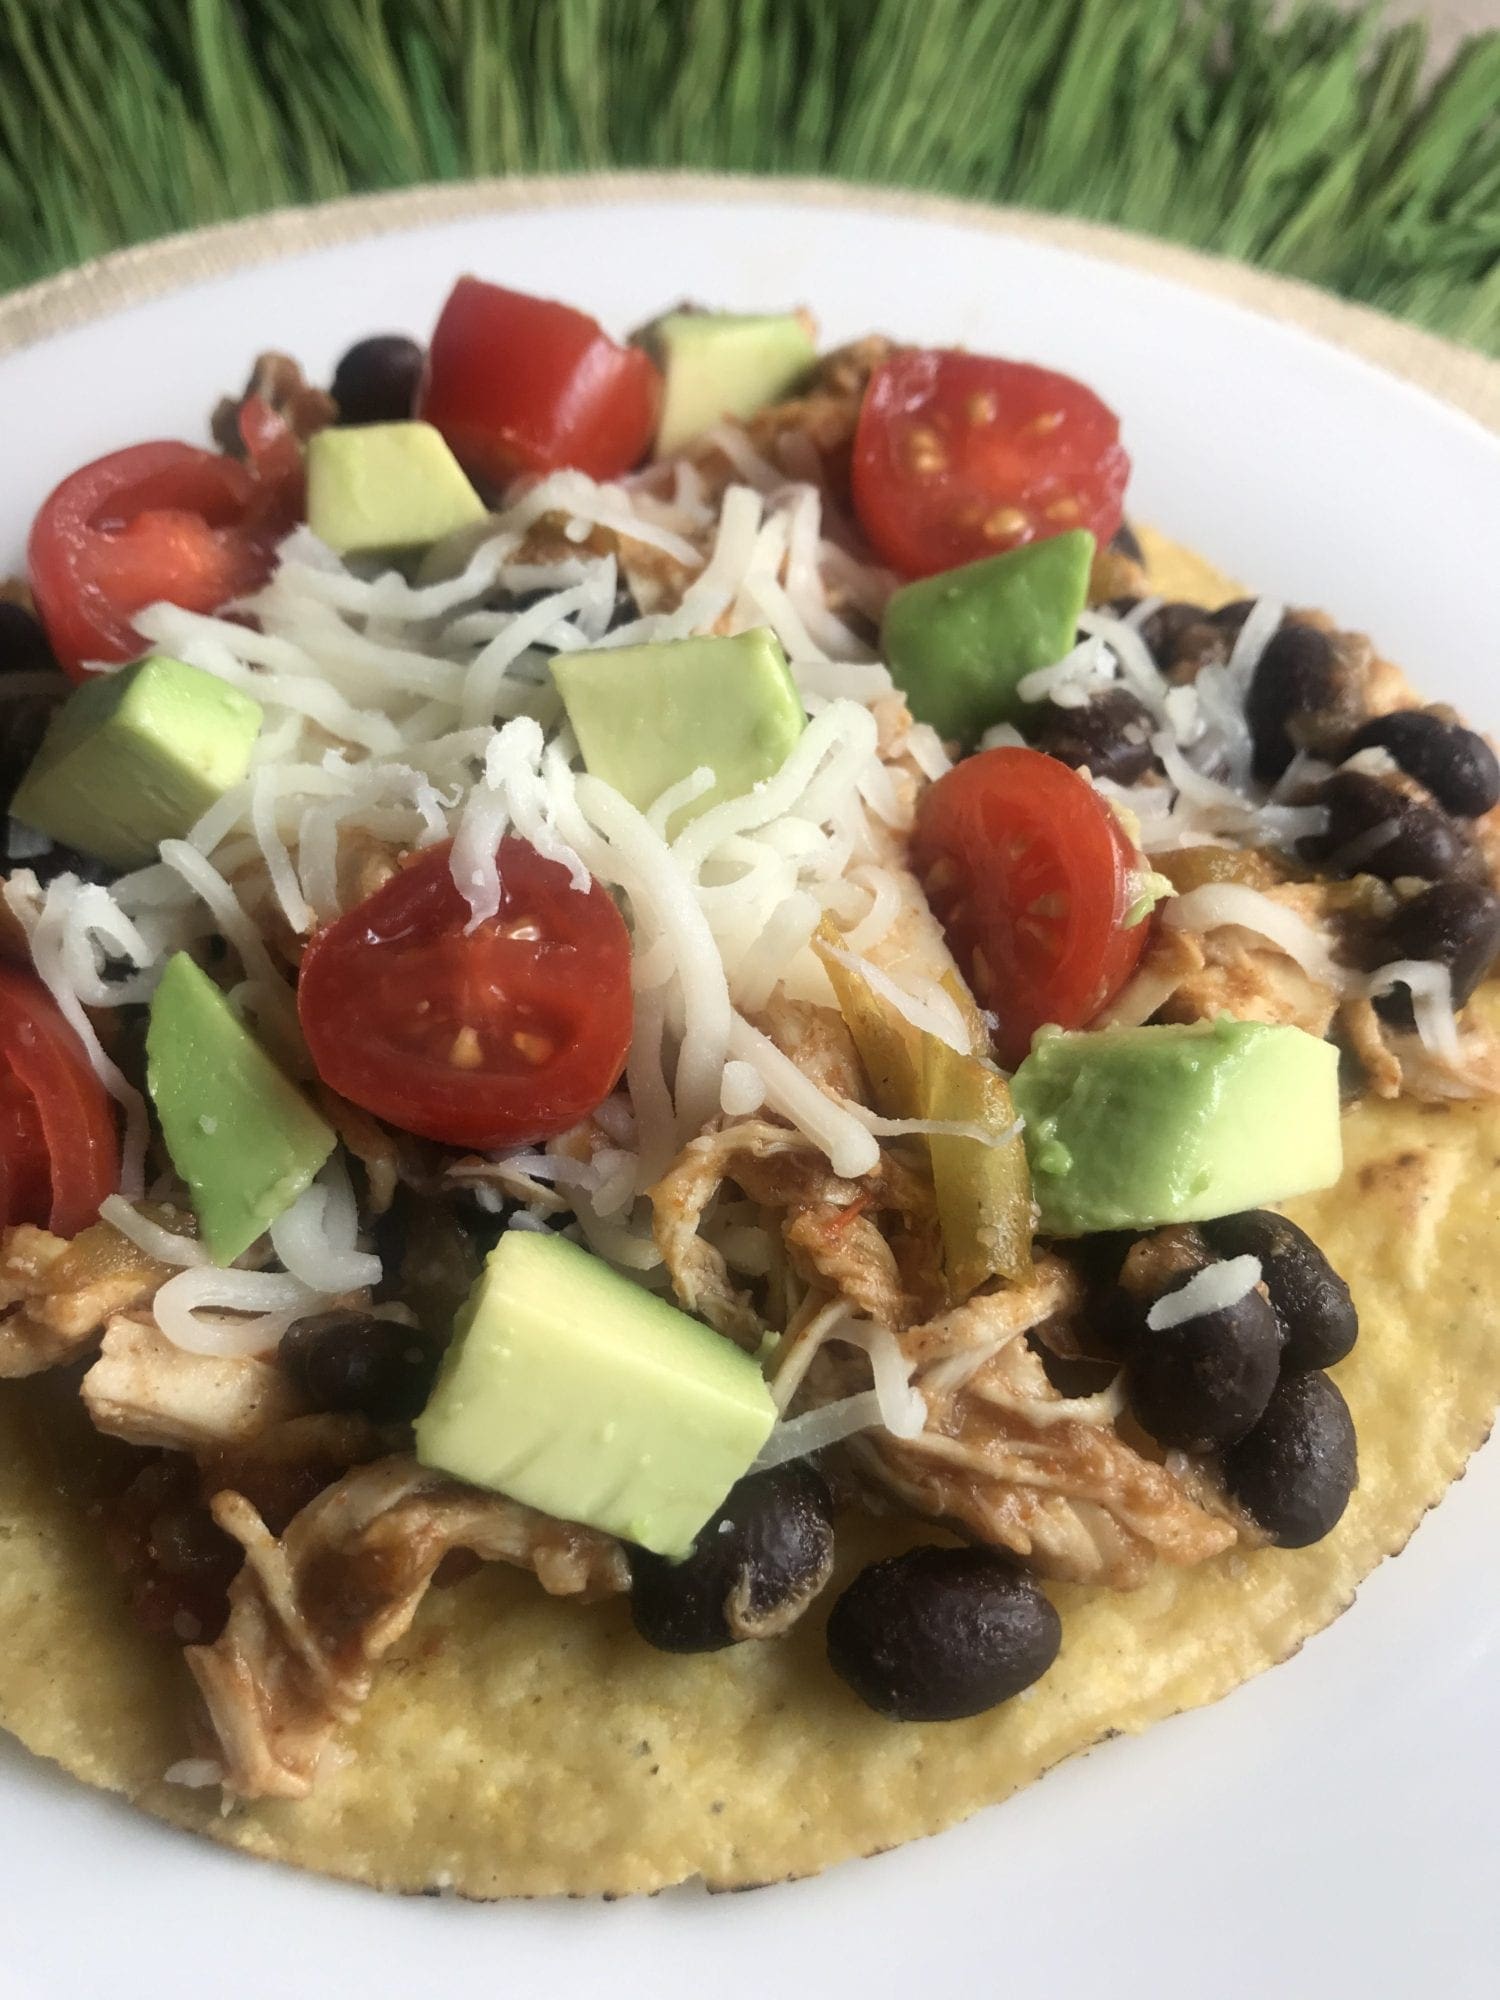 WW Chicken Tostadas on Meal Planning Mommies - Uses shredded chicken, black beans, avocado, tomatoes, and cheese - Just 4 WW FreeStyle SmartPoints per tostada!